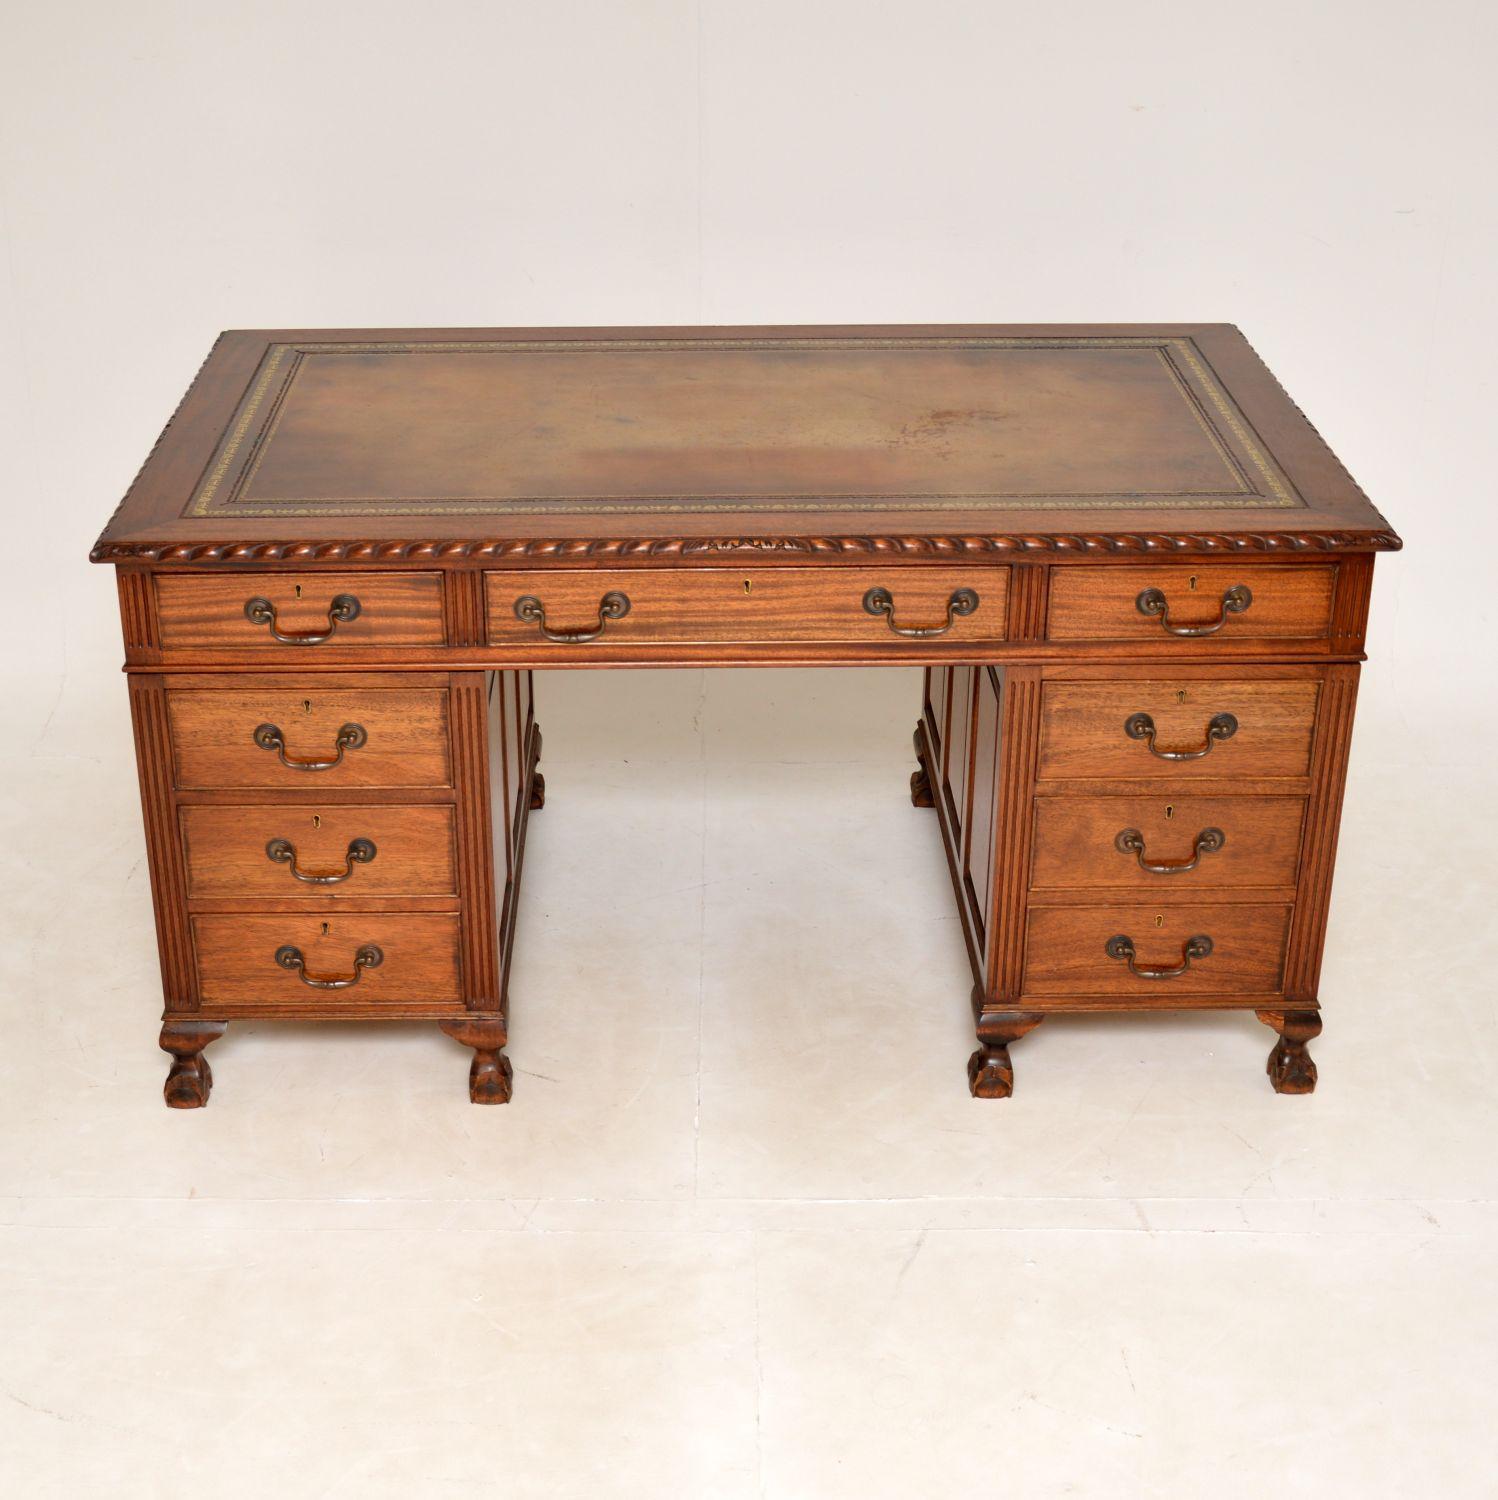 An impressive & large antique desk in the Chippendale style. This was made in England & we would date it from around the 1930’s period.
It is of superb quality and has lots of lovely features. The inset leather top is also of great quality, it is